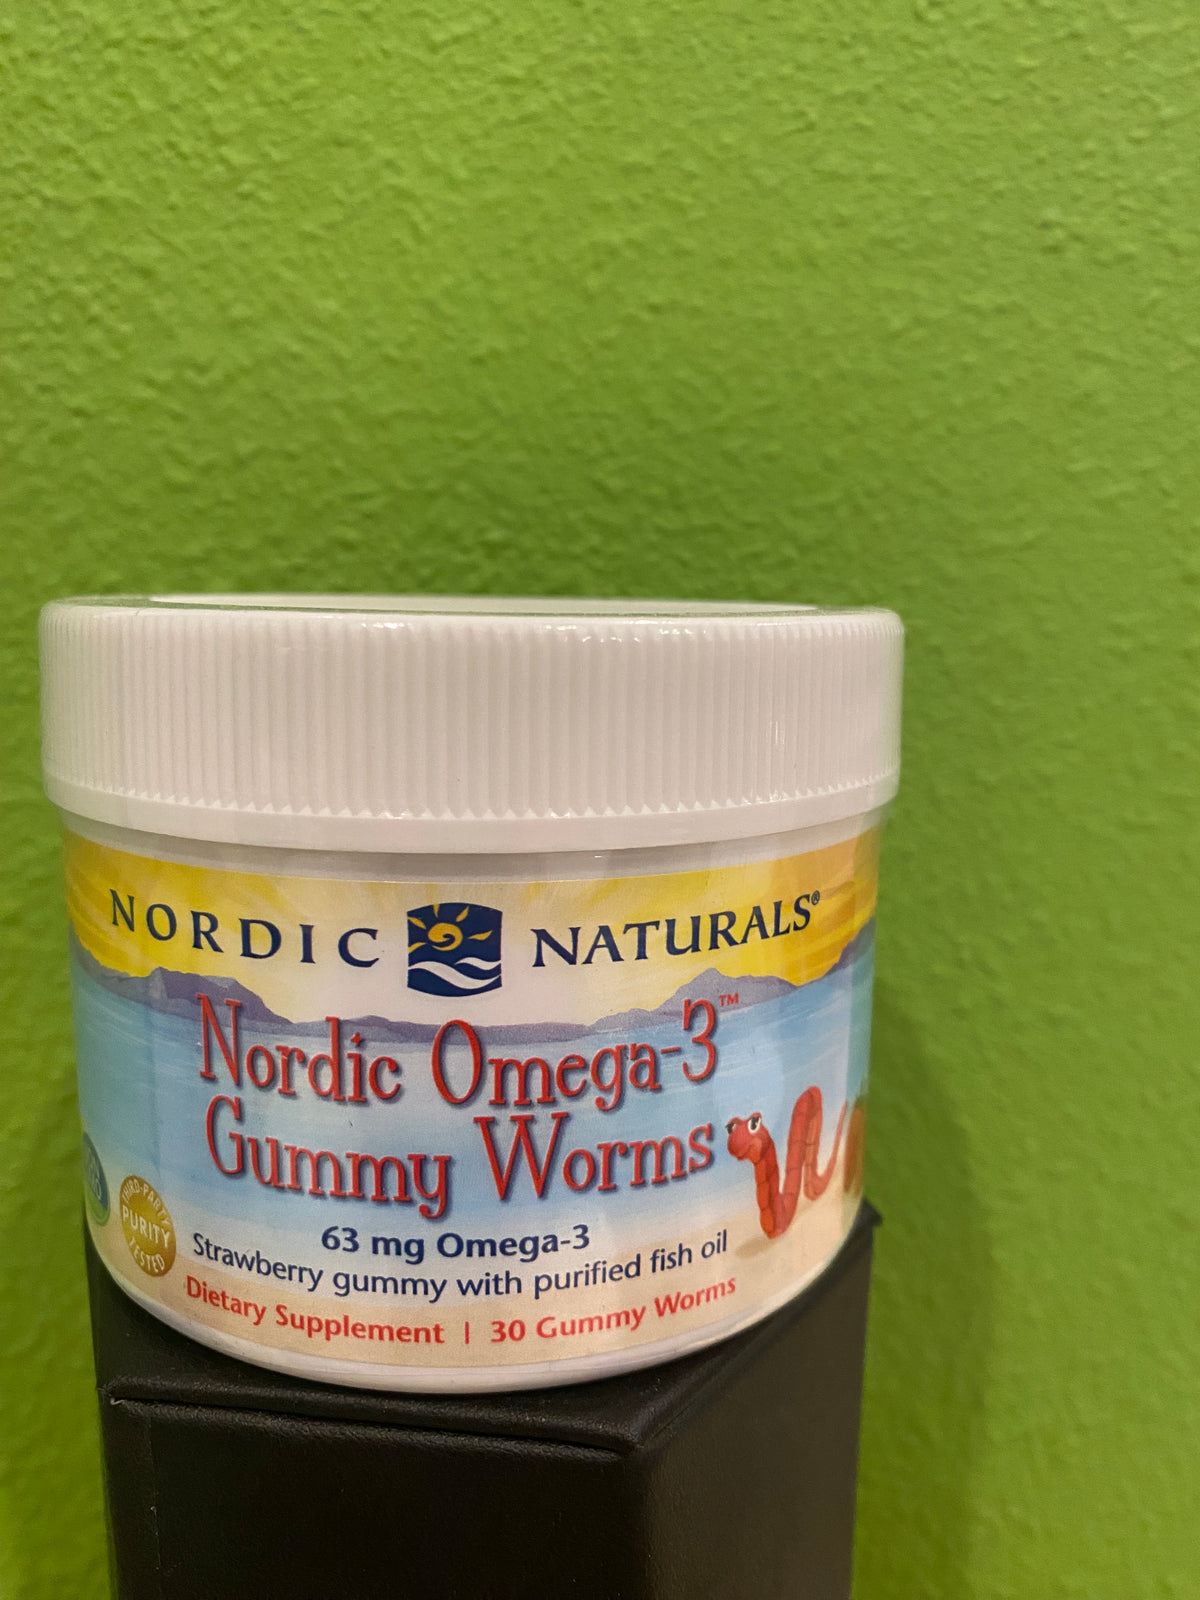 Omega-3 Worms